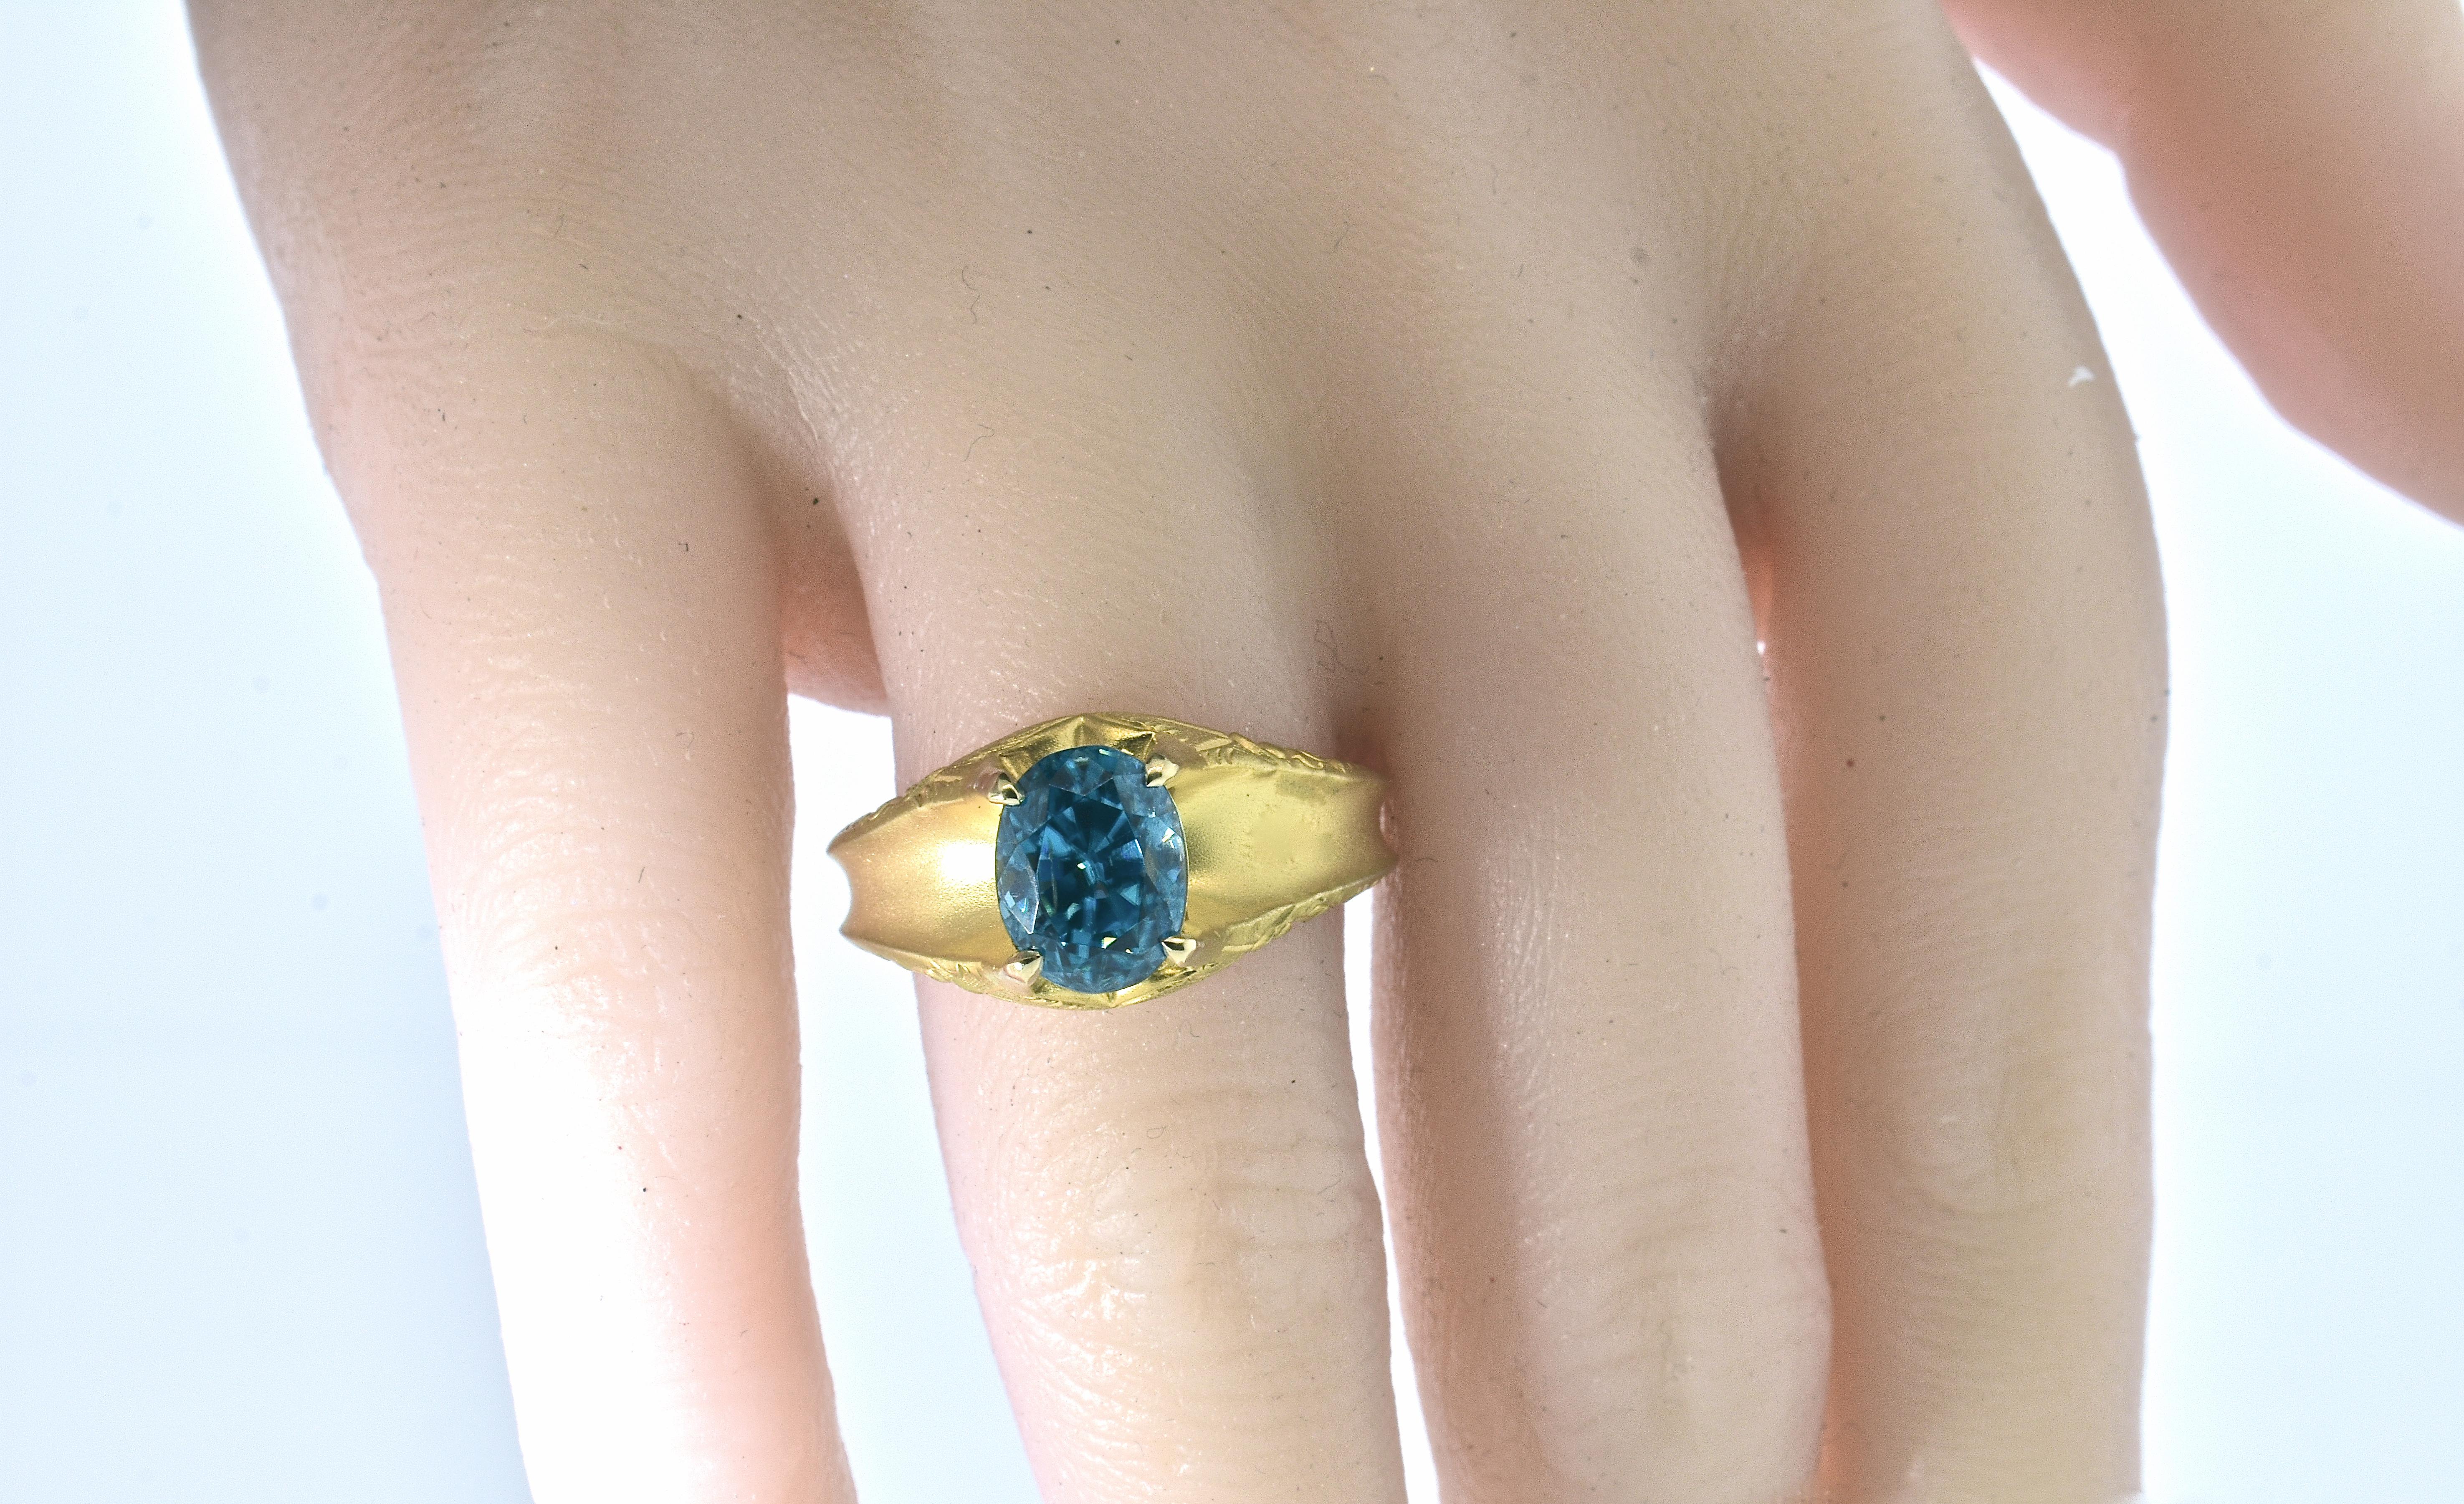 Antique     Victorian 18K gold ring centering a very fine natural blue zircon weighing an estimated 7.50 cts.  This oval stone is intensely brilliant and a vivid blue color and free of inclusions. This Victorian ring is from the last quarter of the